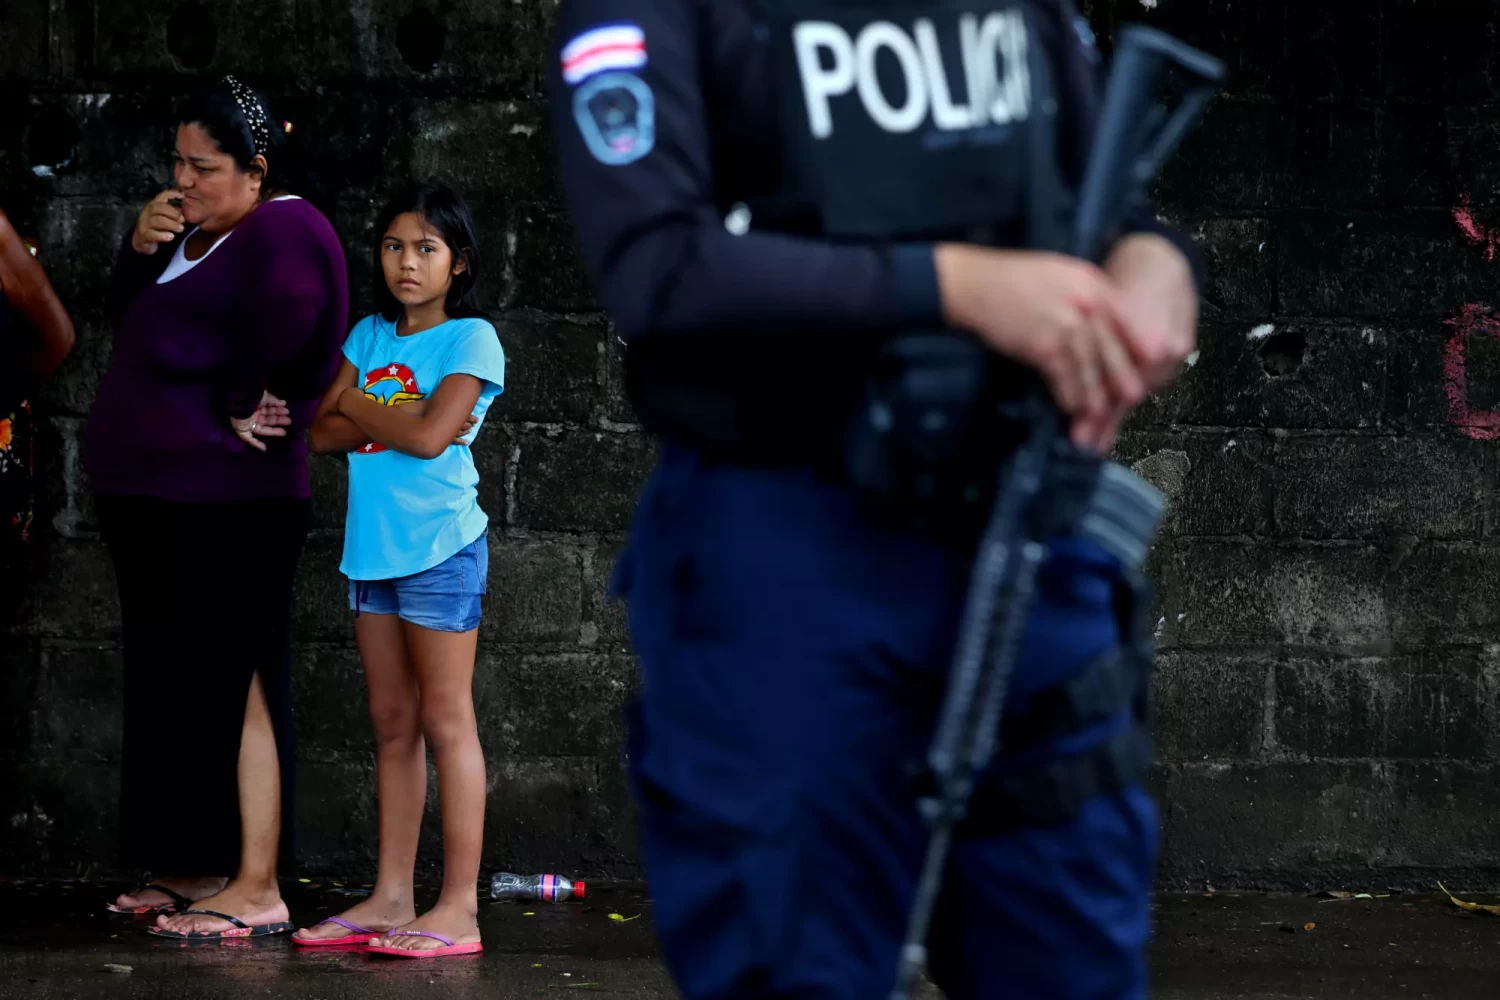 A young girl takes in a police roadblock in Chacarita, Costa Rica, where violence has skyrocketed in recent years. (Gary Coronado / Los Angeles Times)